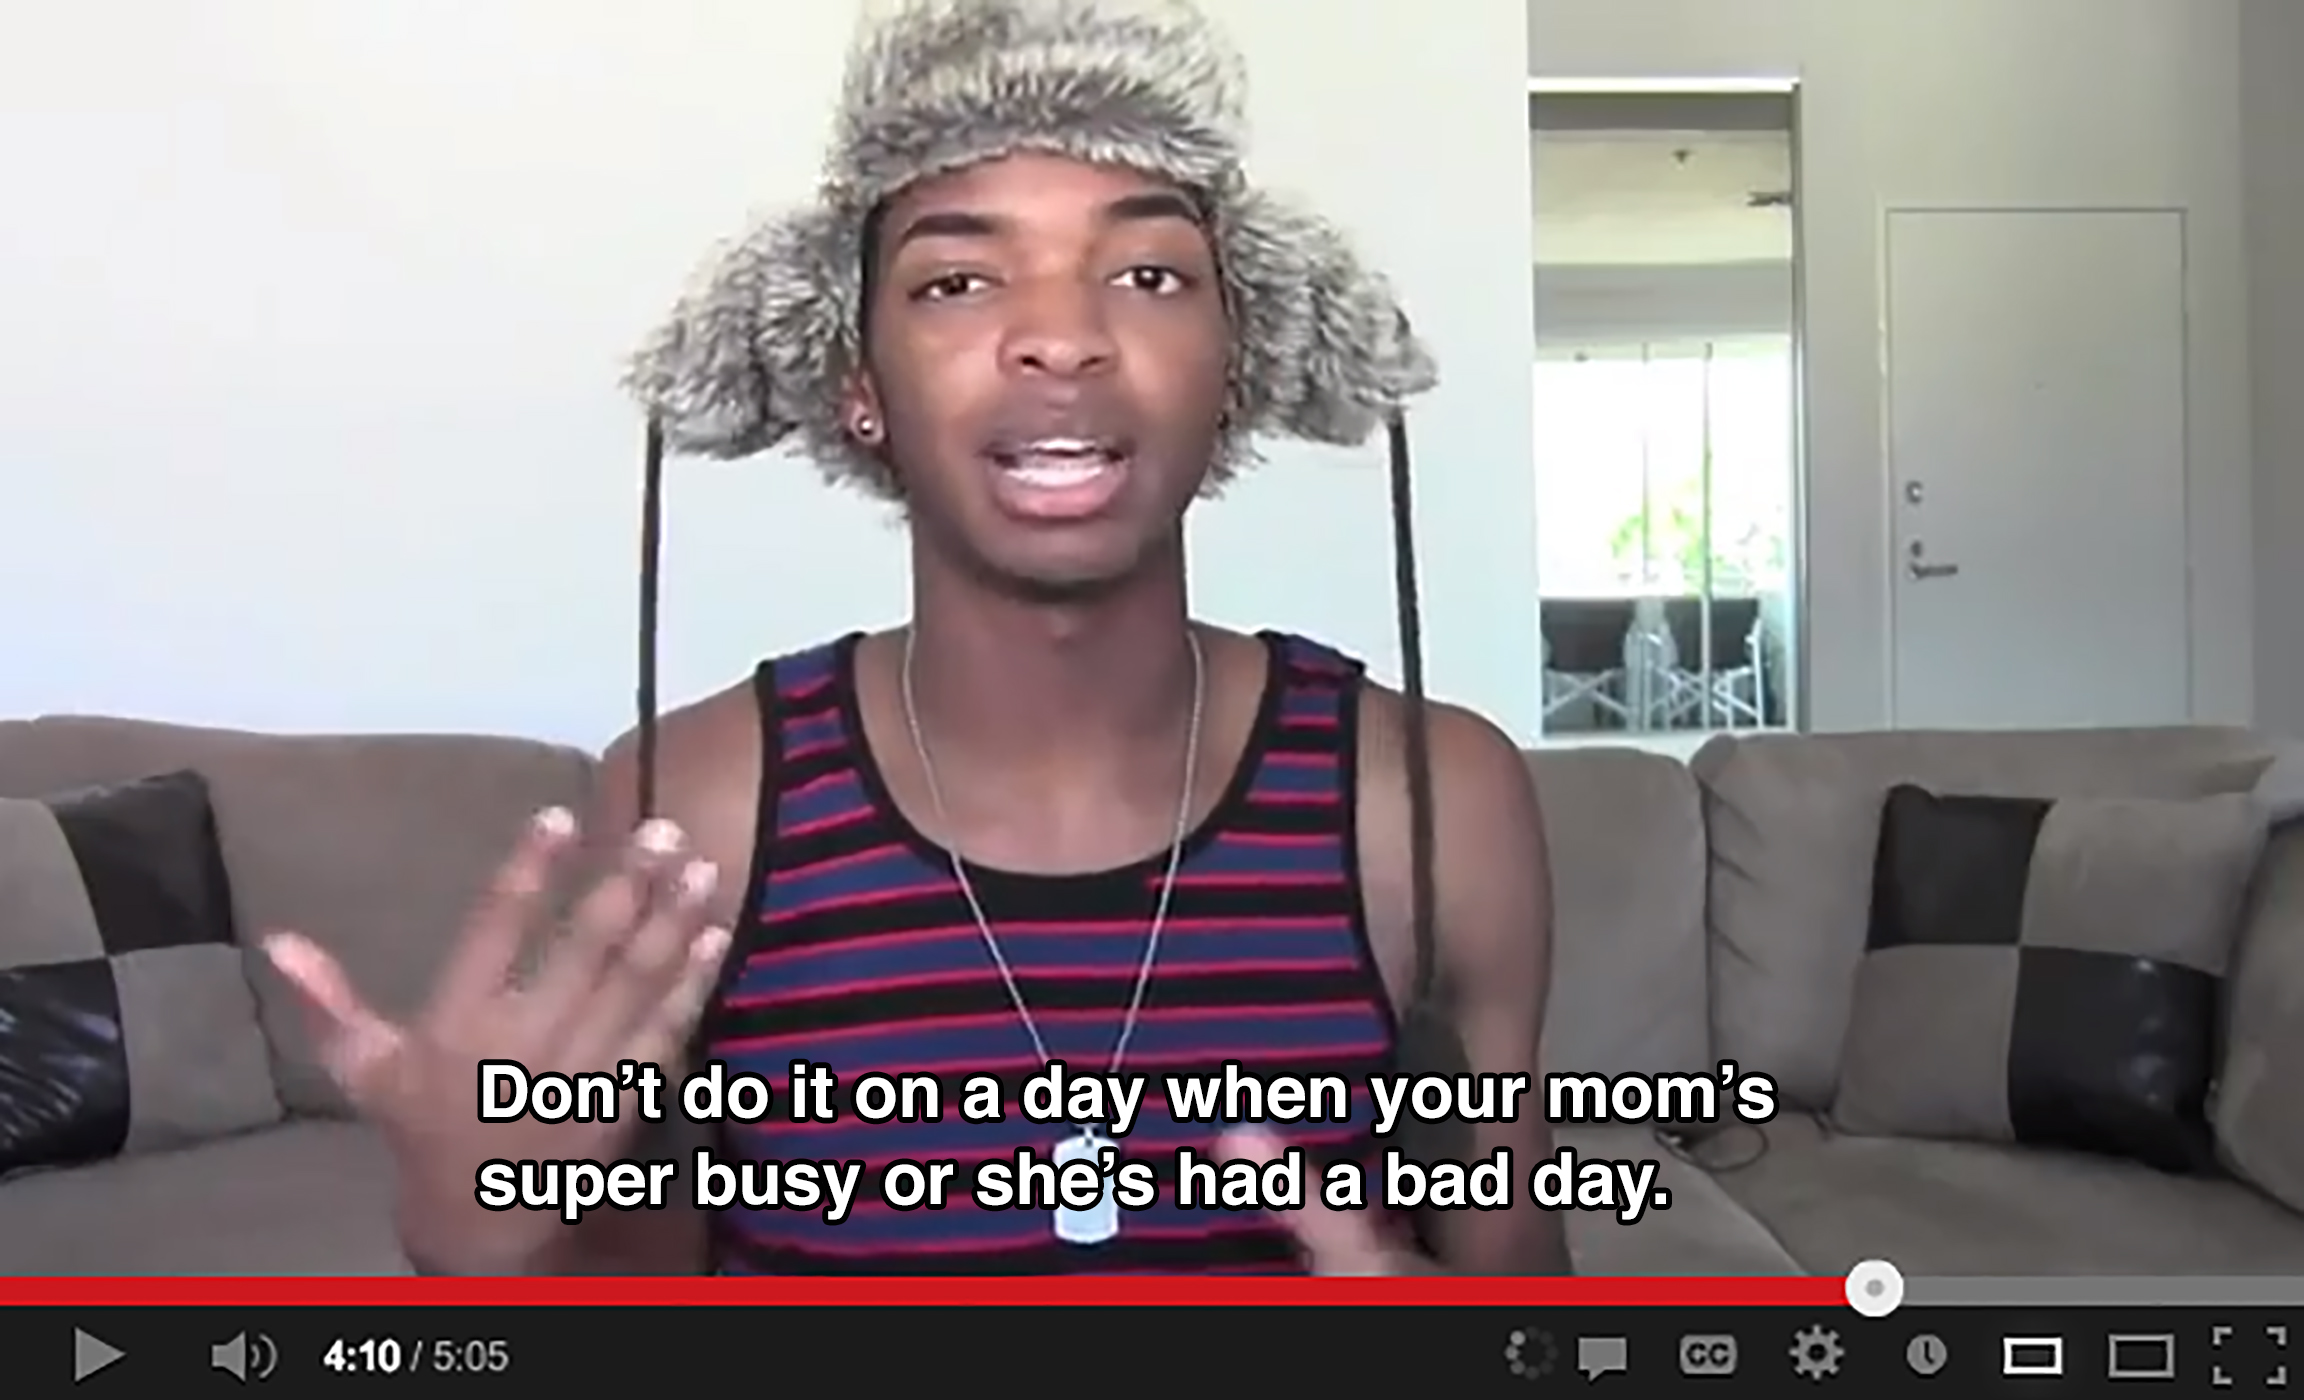 A teenager wearing a tank top and a trapper hat in a living room gestures with his hand and says: Don't do it on a day when your mom's super busy or she's had a bad day.